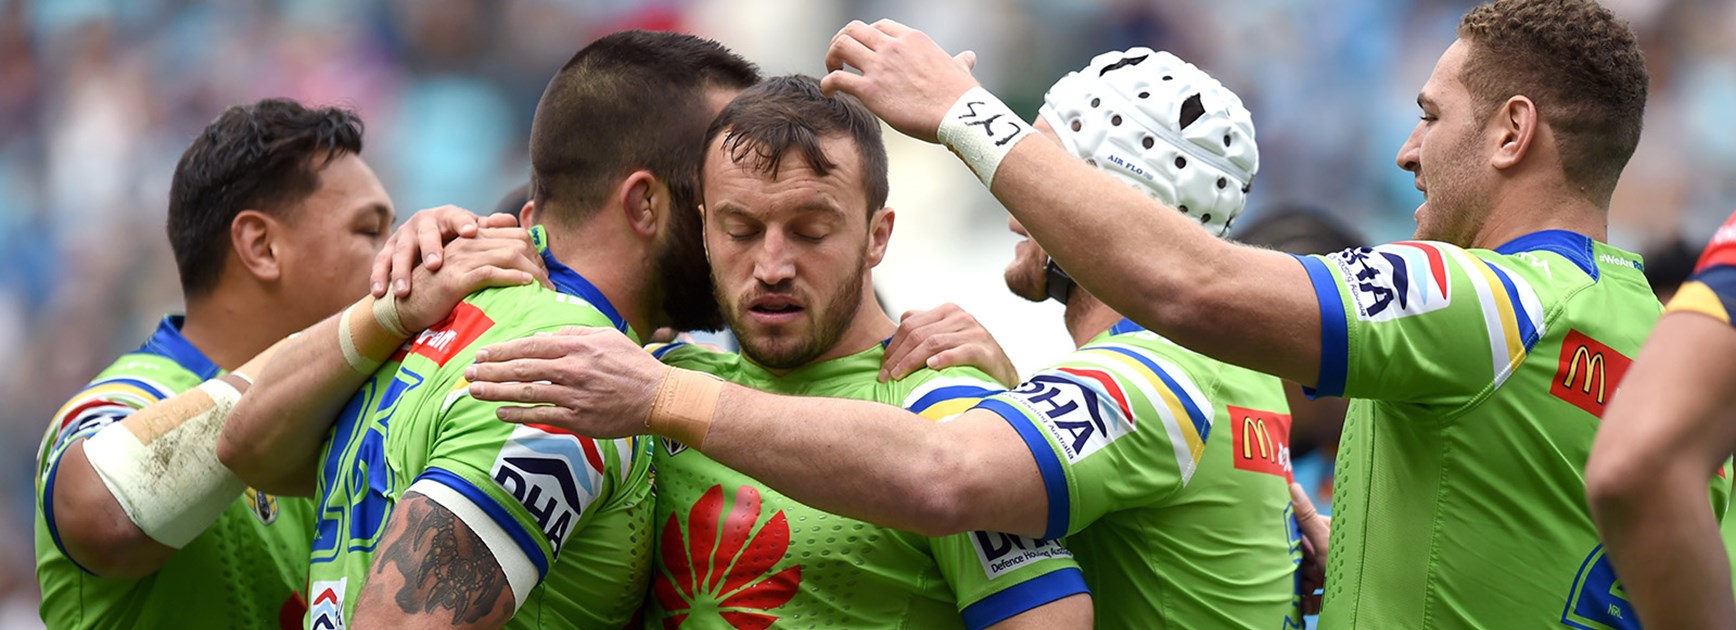 The Canberra Raiders celebrate a try against the Titans.